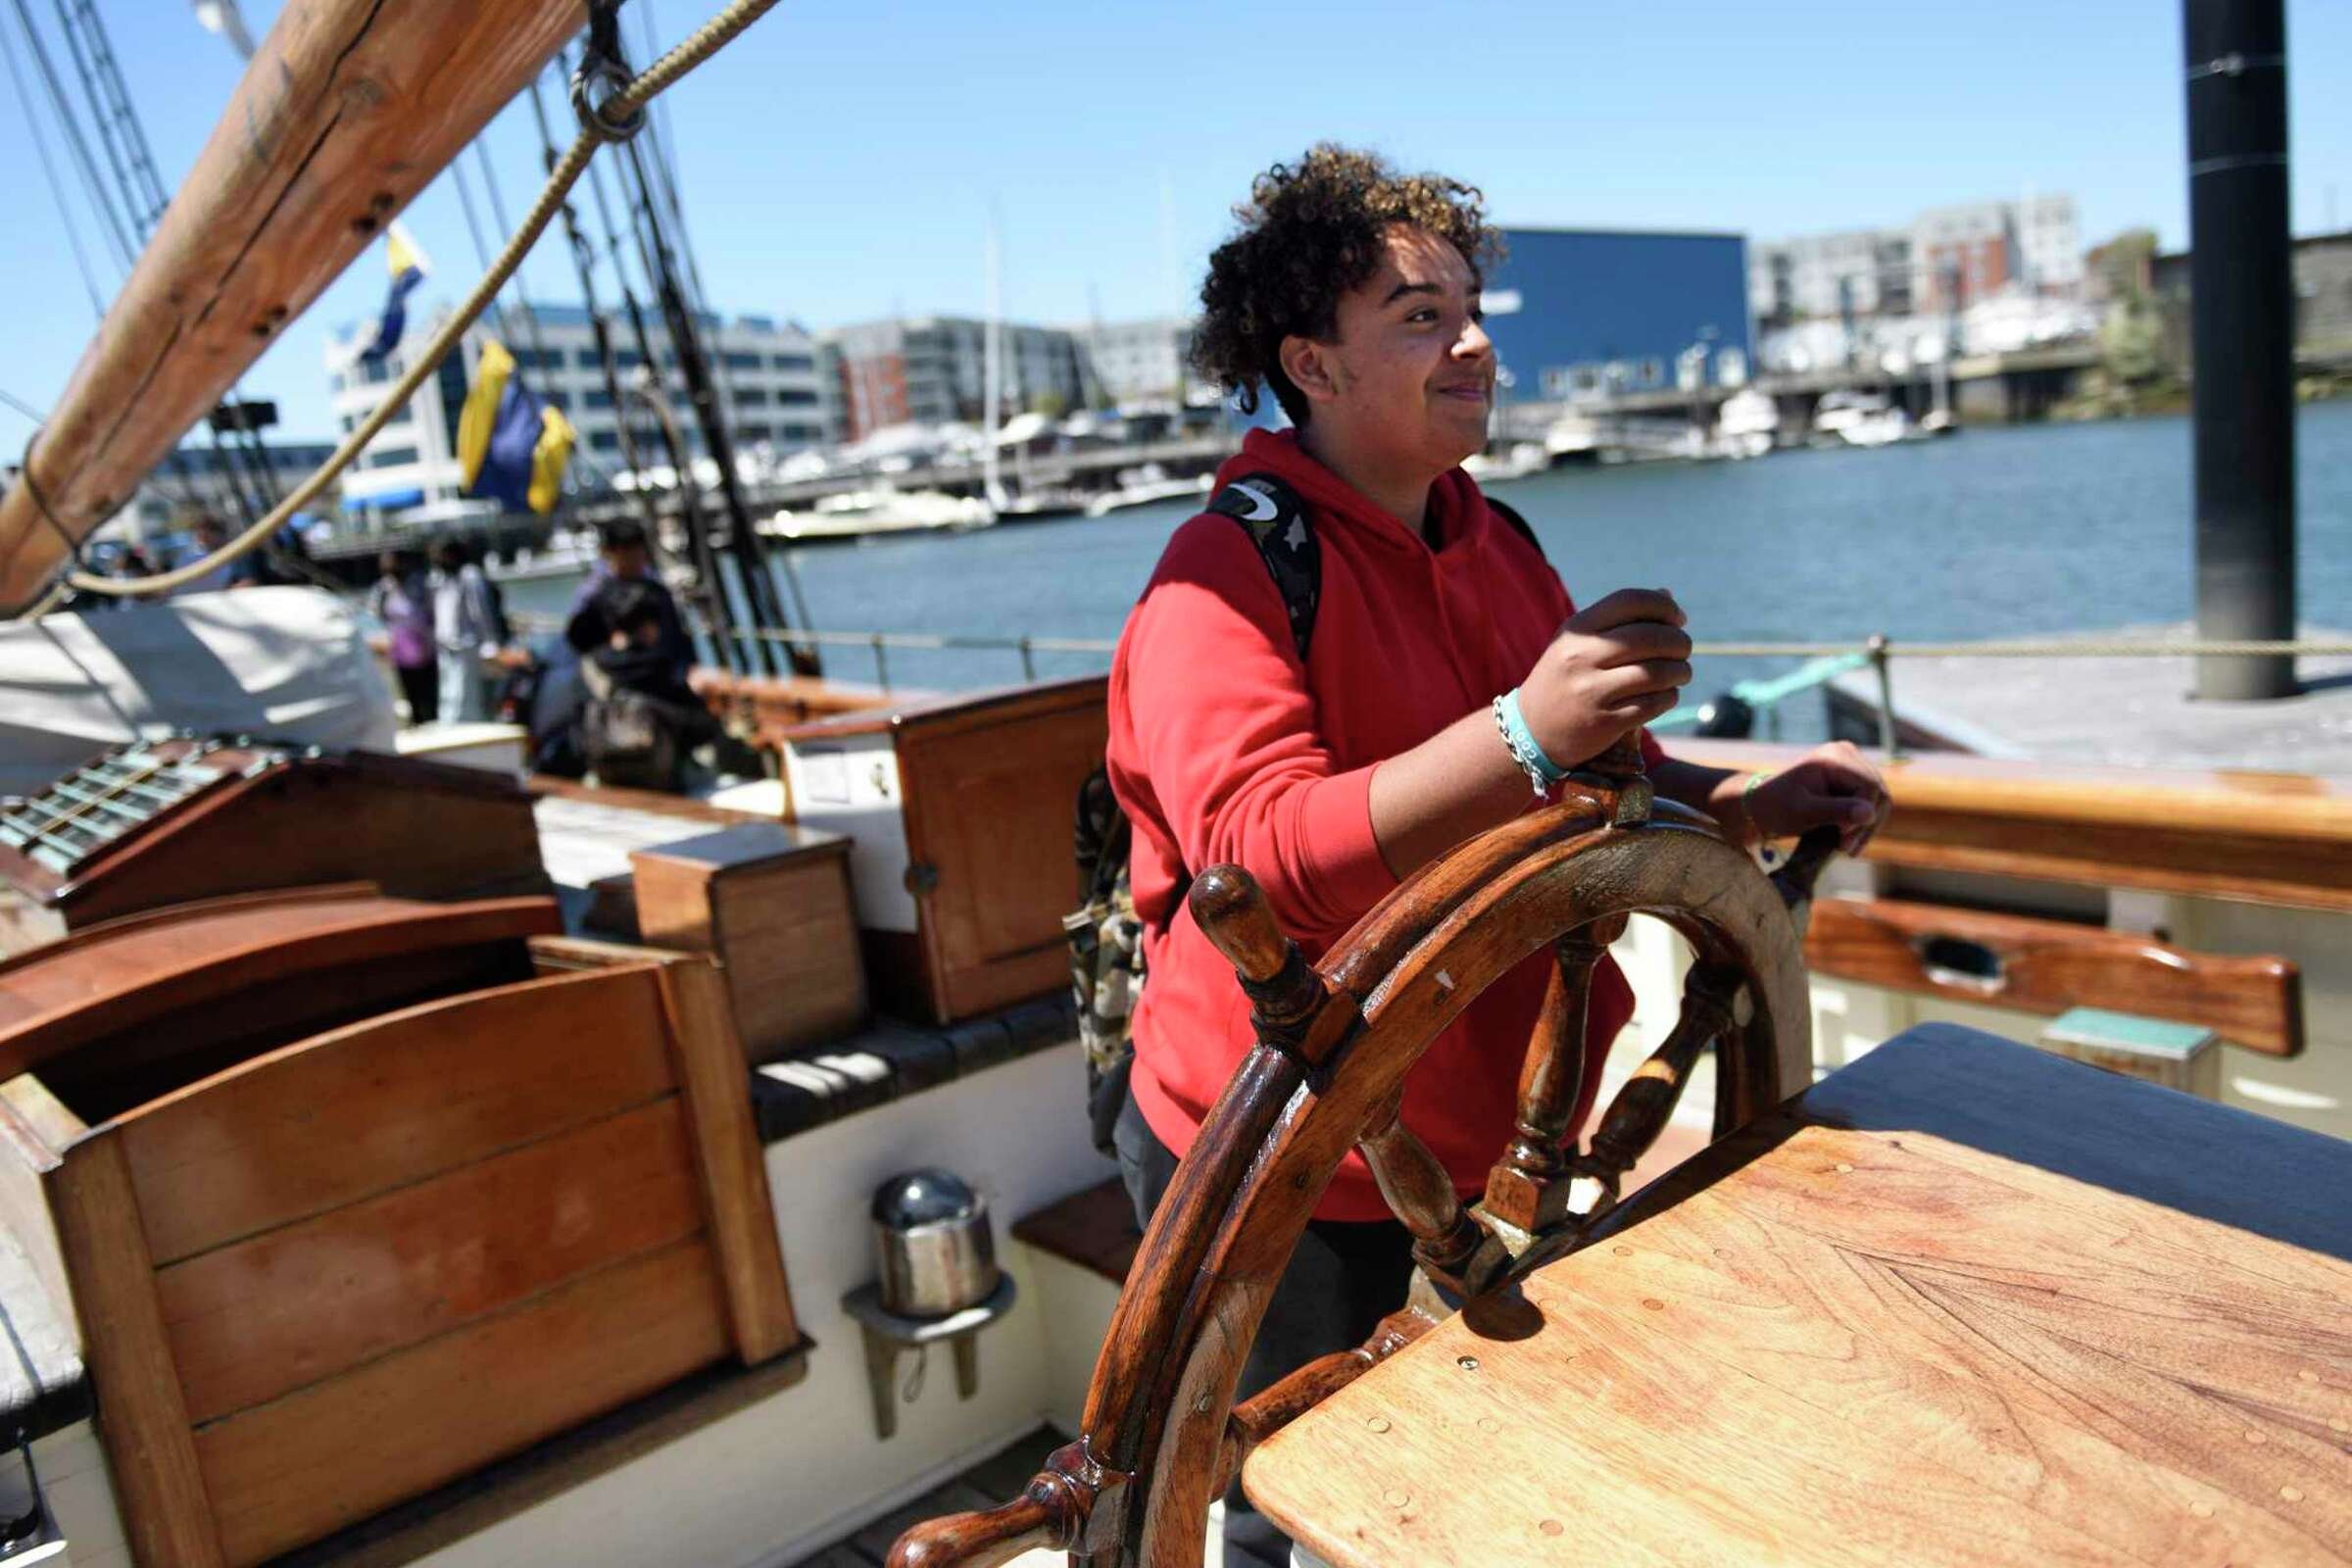  Eighth-grader Jefferson Hernandez takes the helm aboard a reproduction of the Amistad slave ship docked at Harbor Point in Stamford, Conn. Monday, May 9, 2022. Eighth grade students toured the ship to kick off the new partnership between Stamford Pu